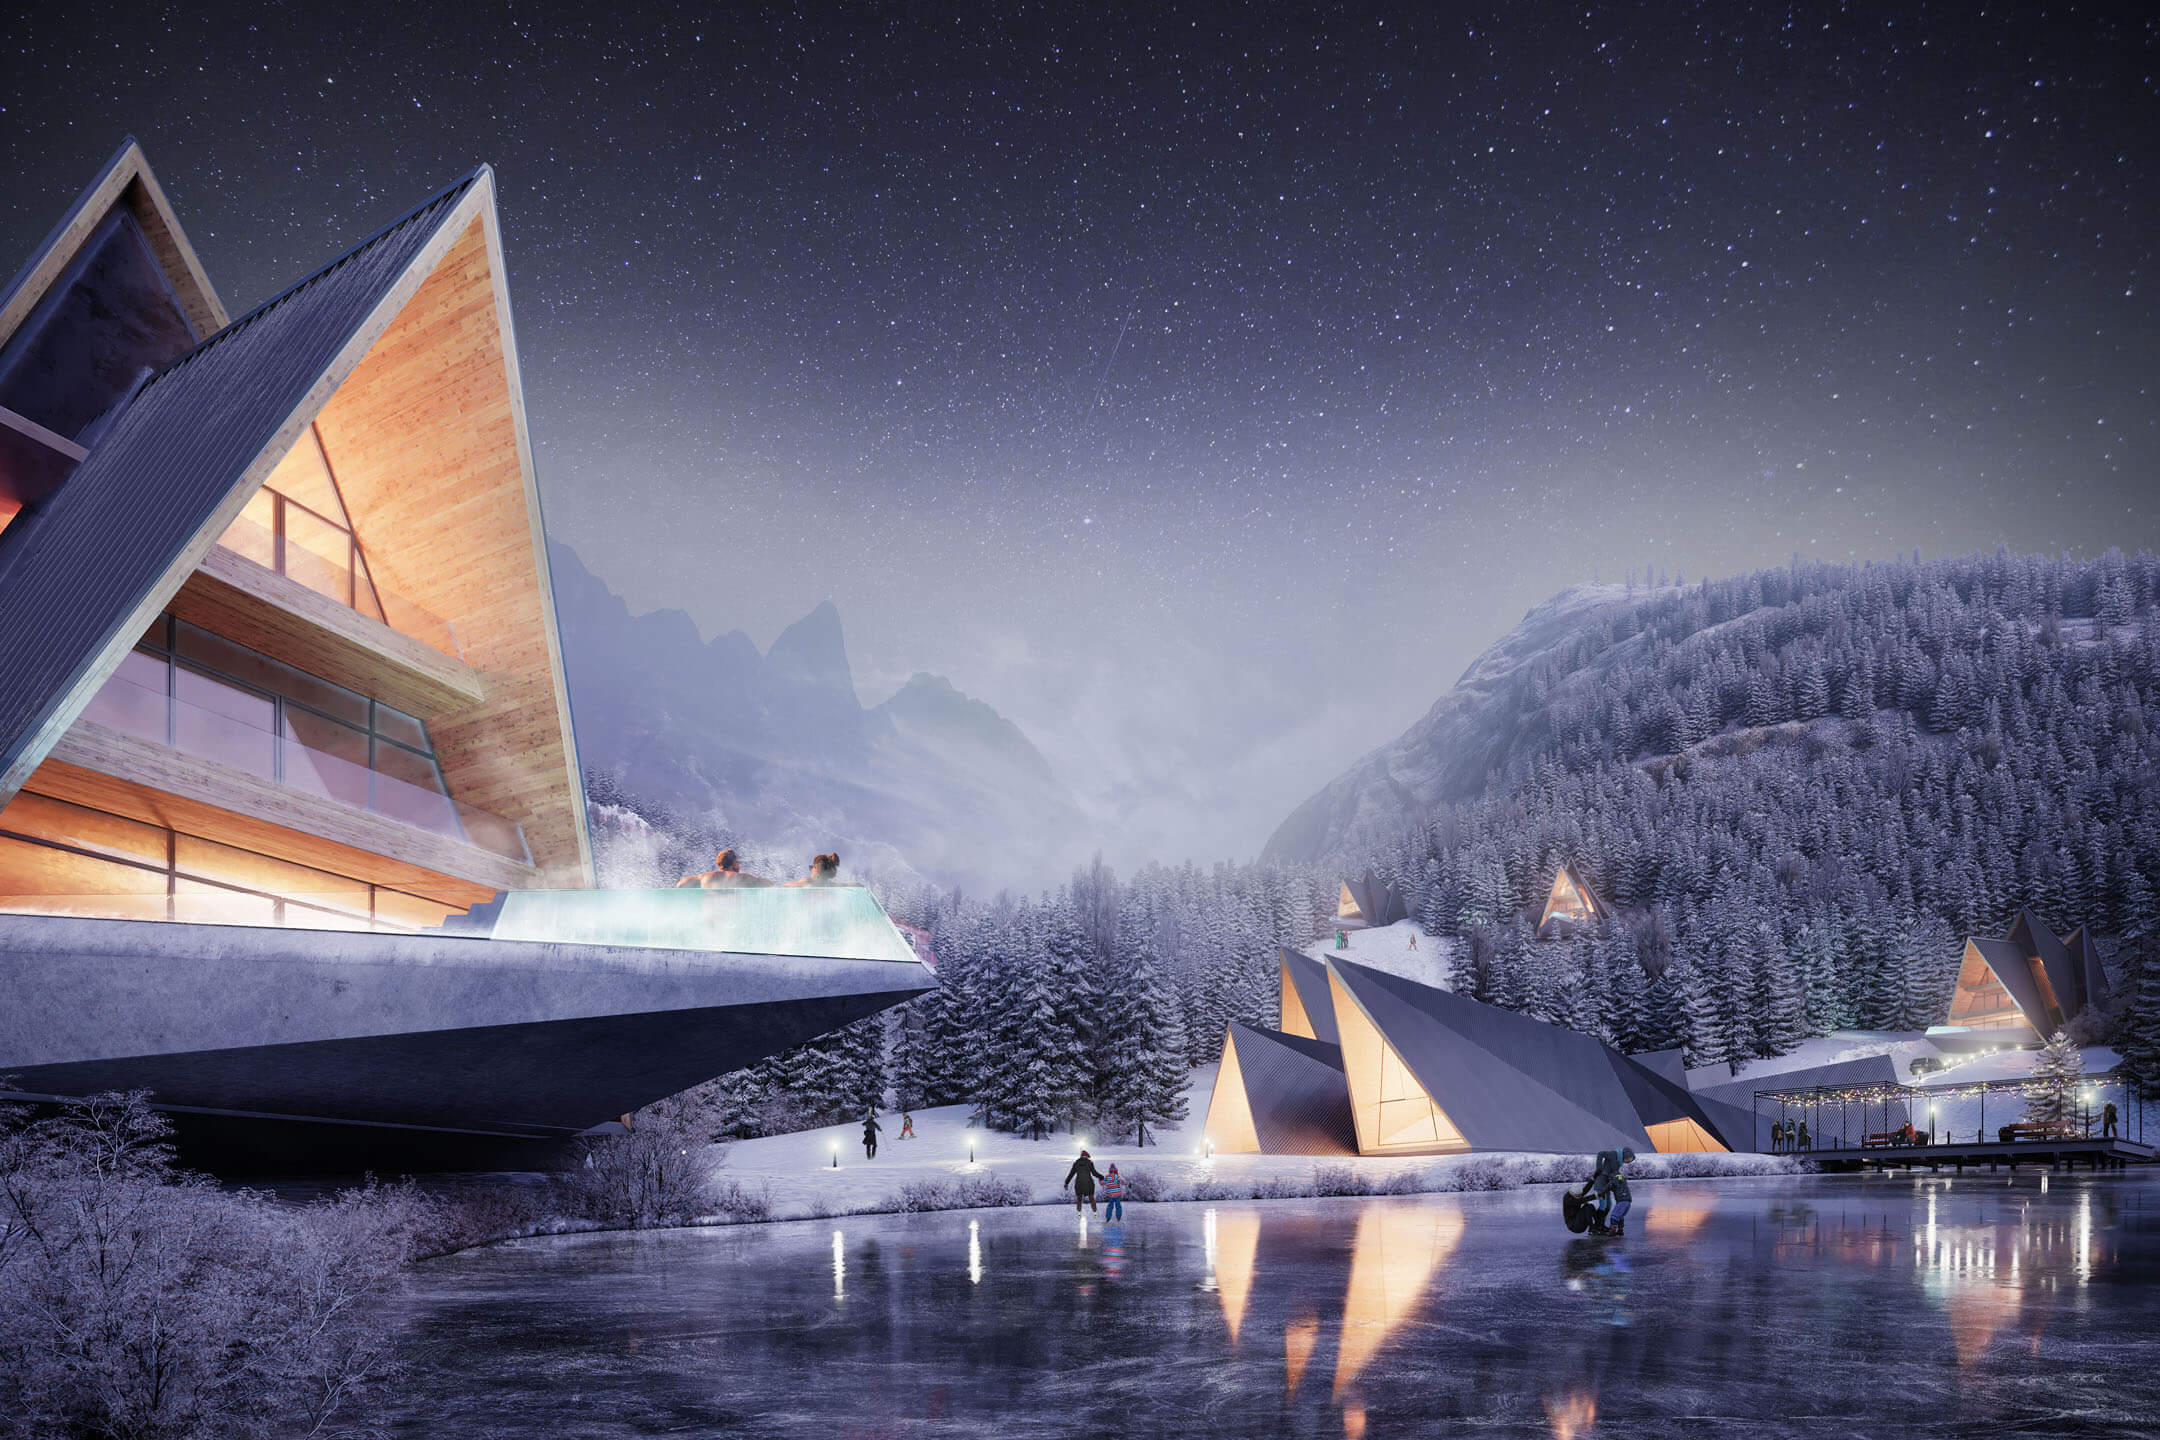 3D Visualization of a Gorgeous Hotel in the Mountains